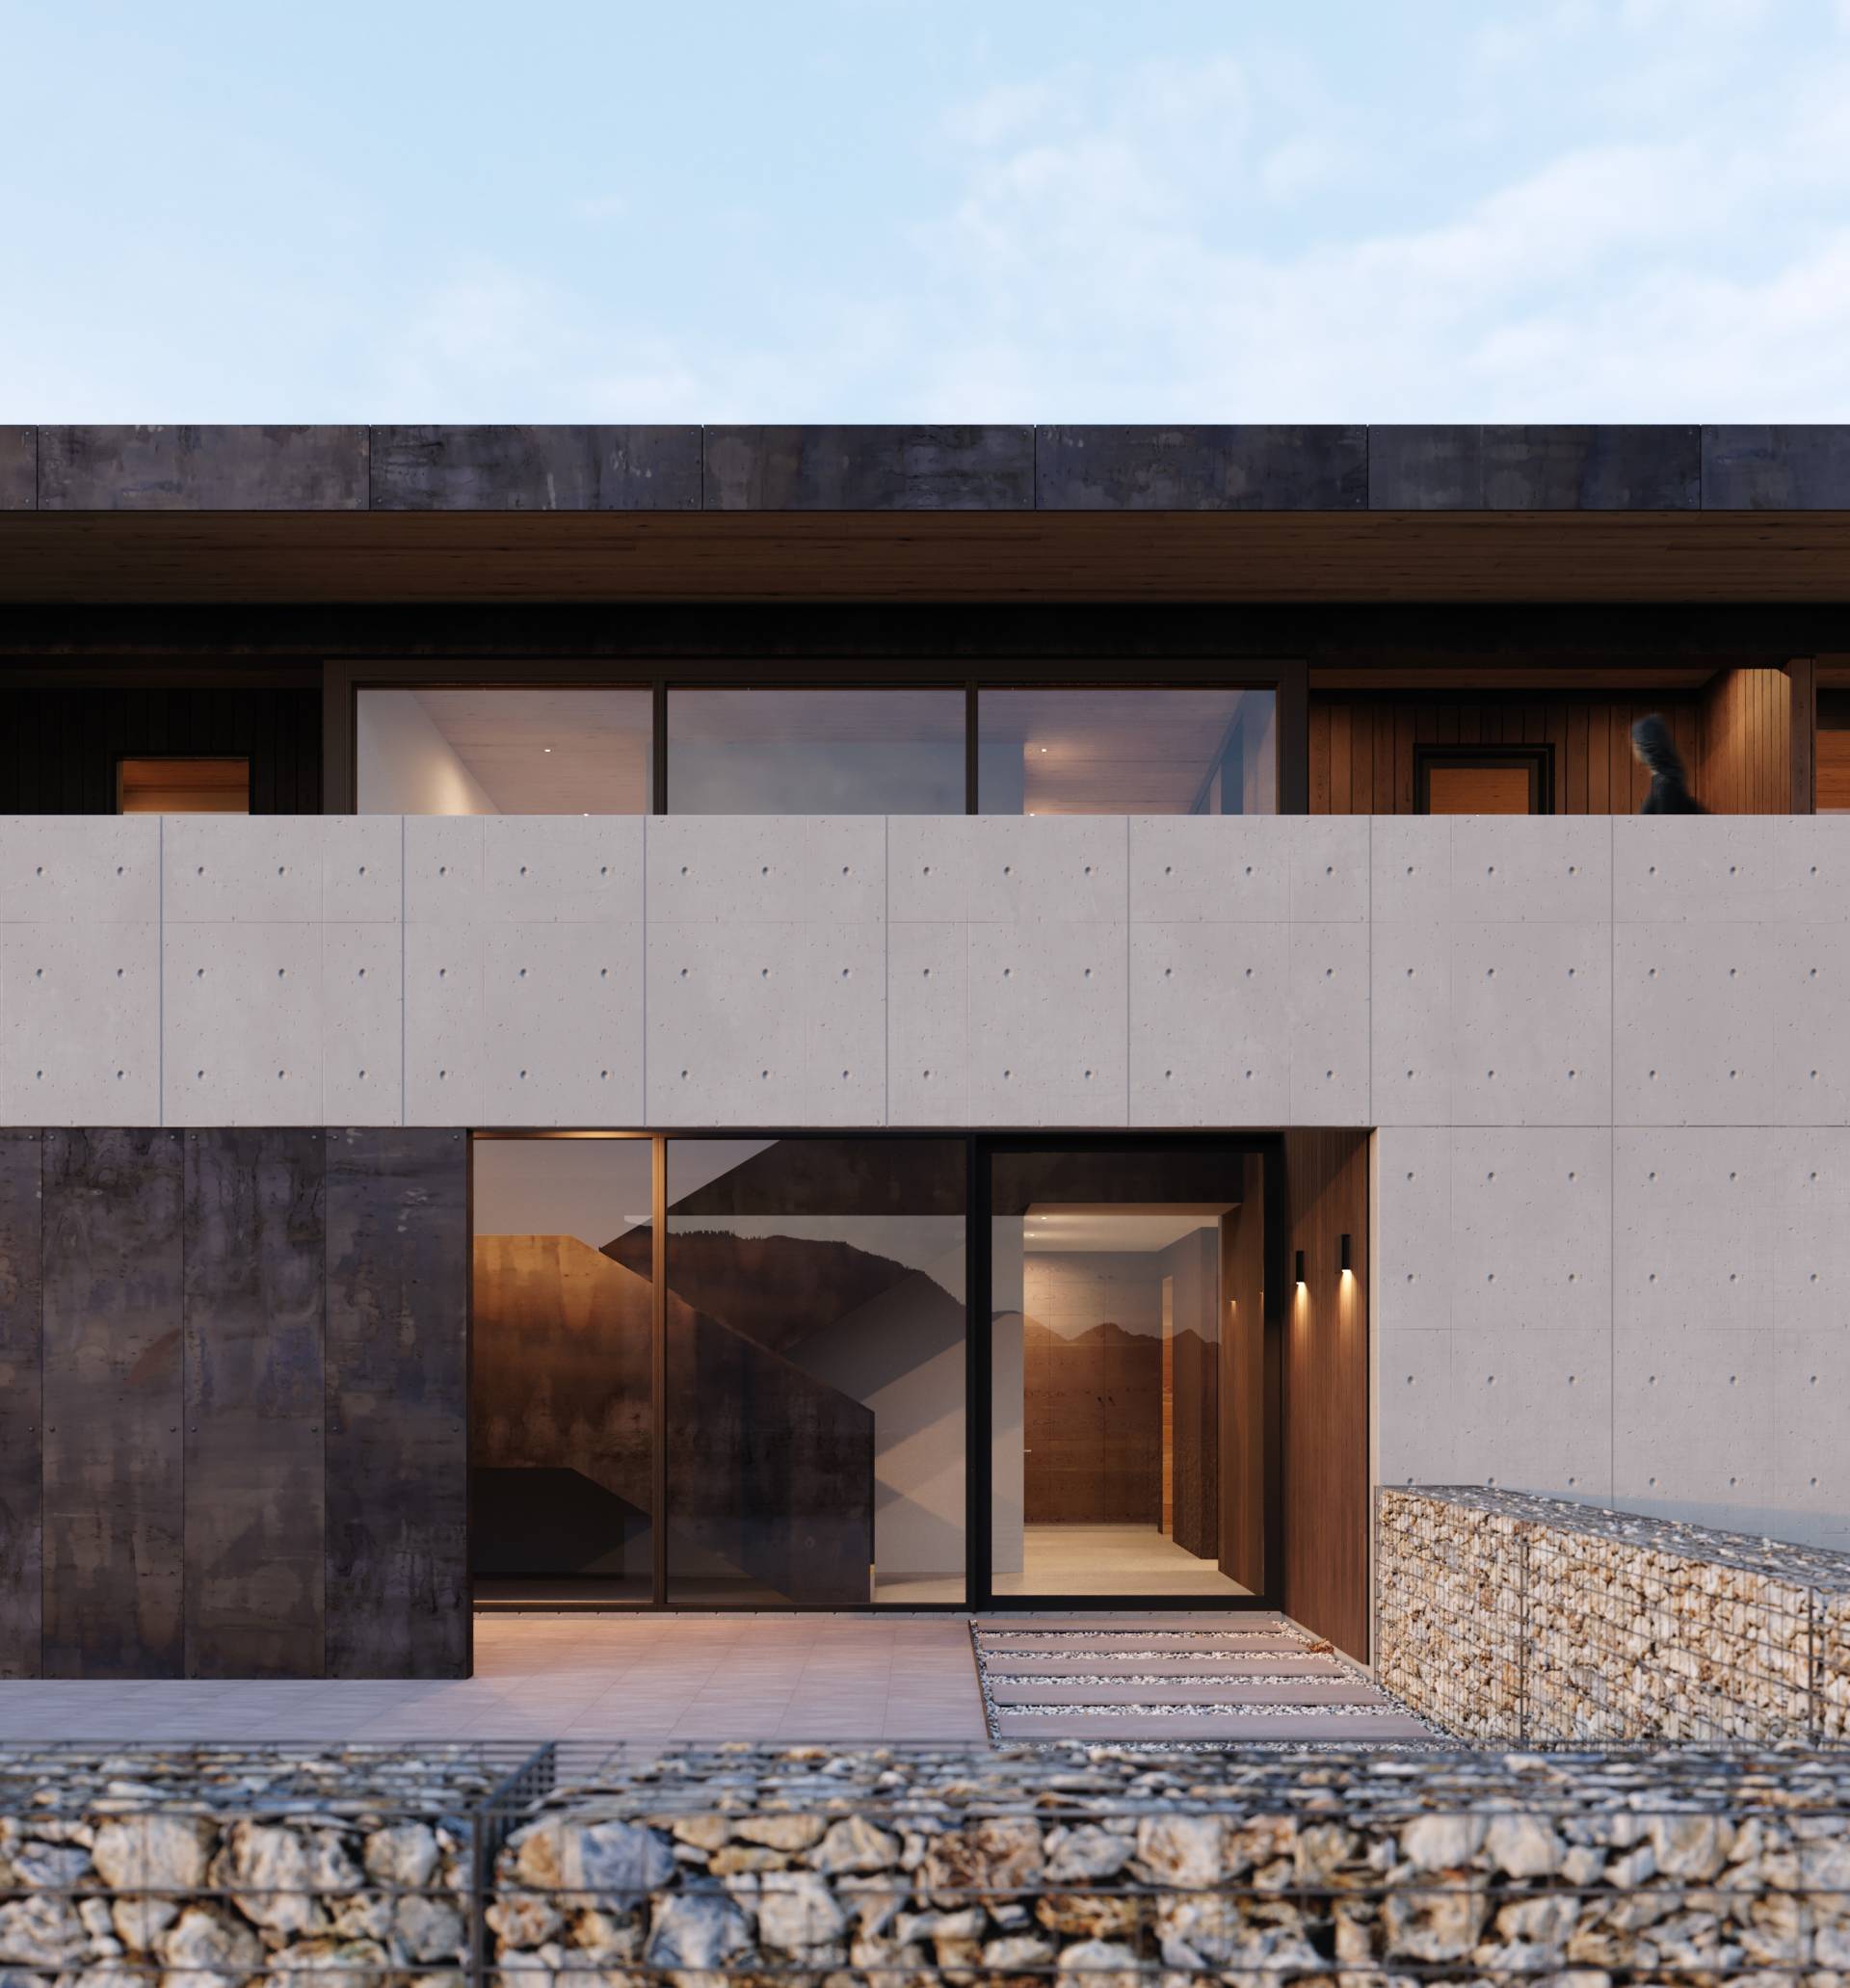 A 3D rendering of the facade at LRN, a custom home designed by Farmer Payne Architects.